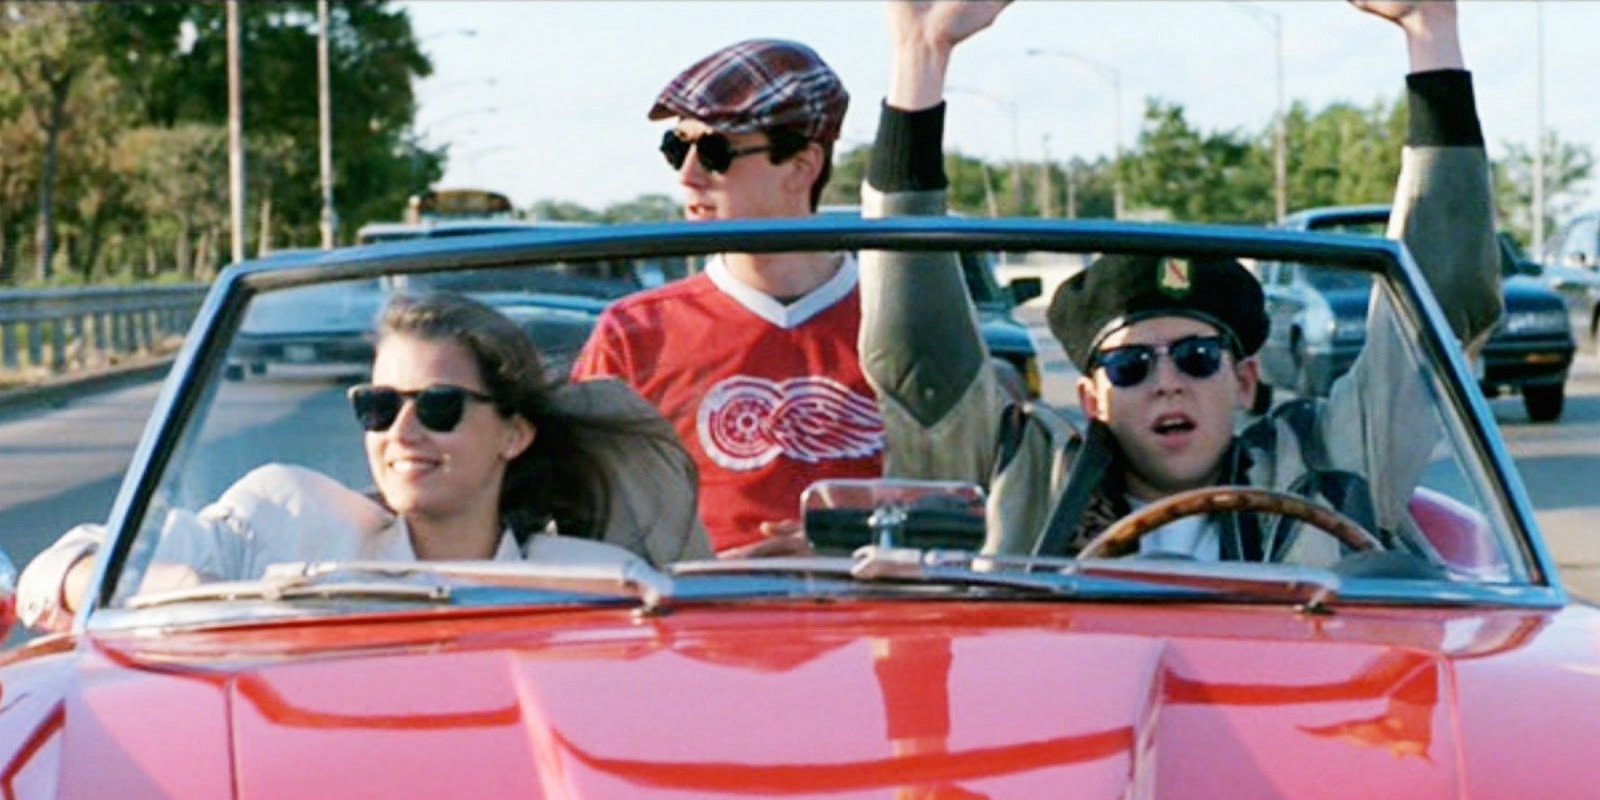 Why The Cast & Crew Of Ferris Bueller Cheered When The Ferrari Was Destroyed